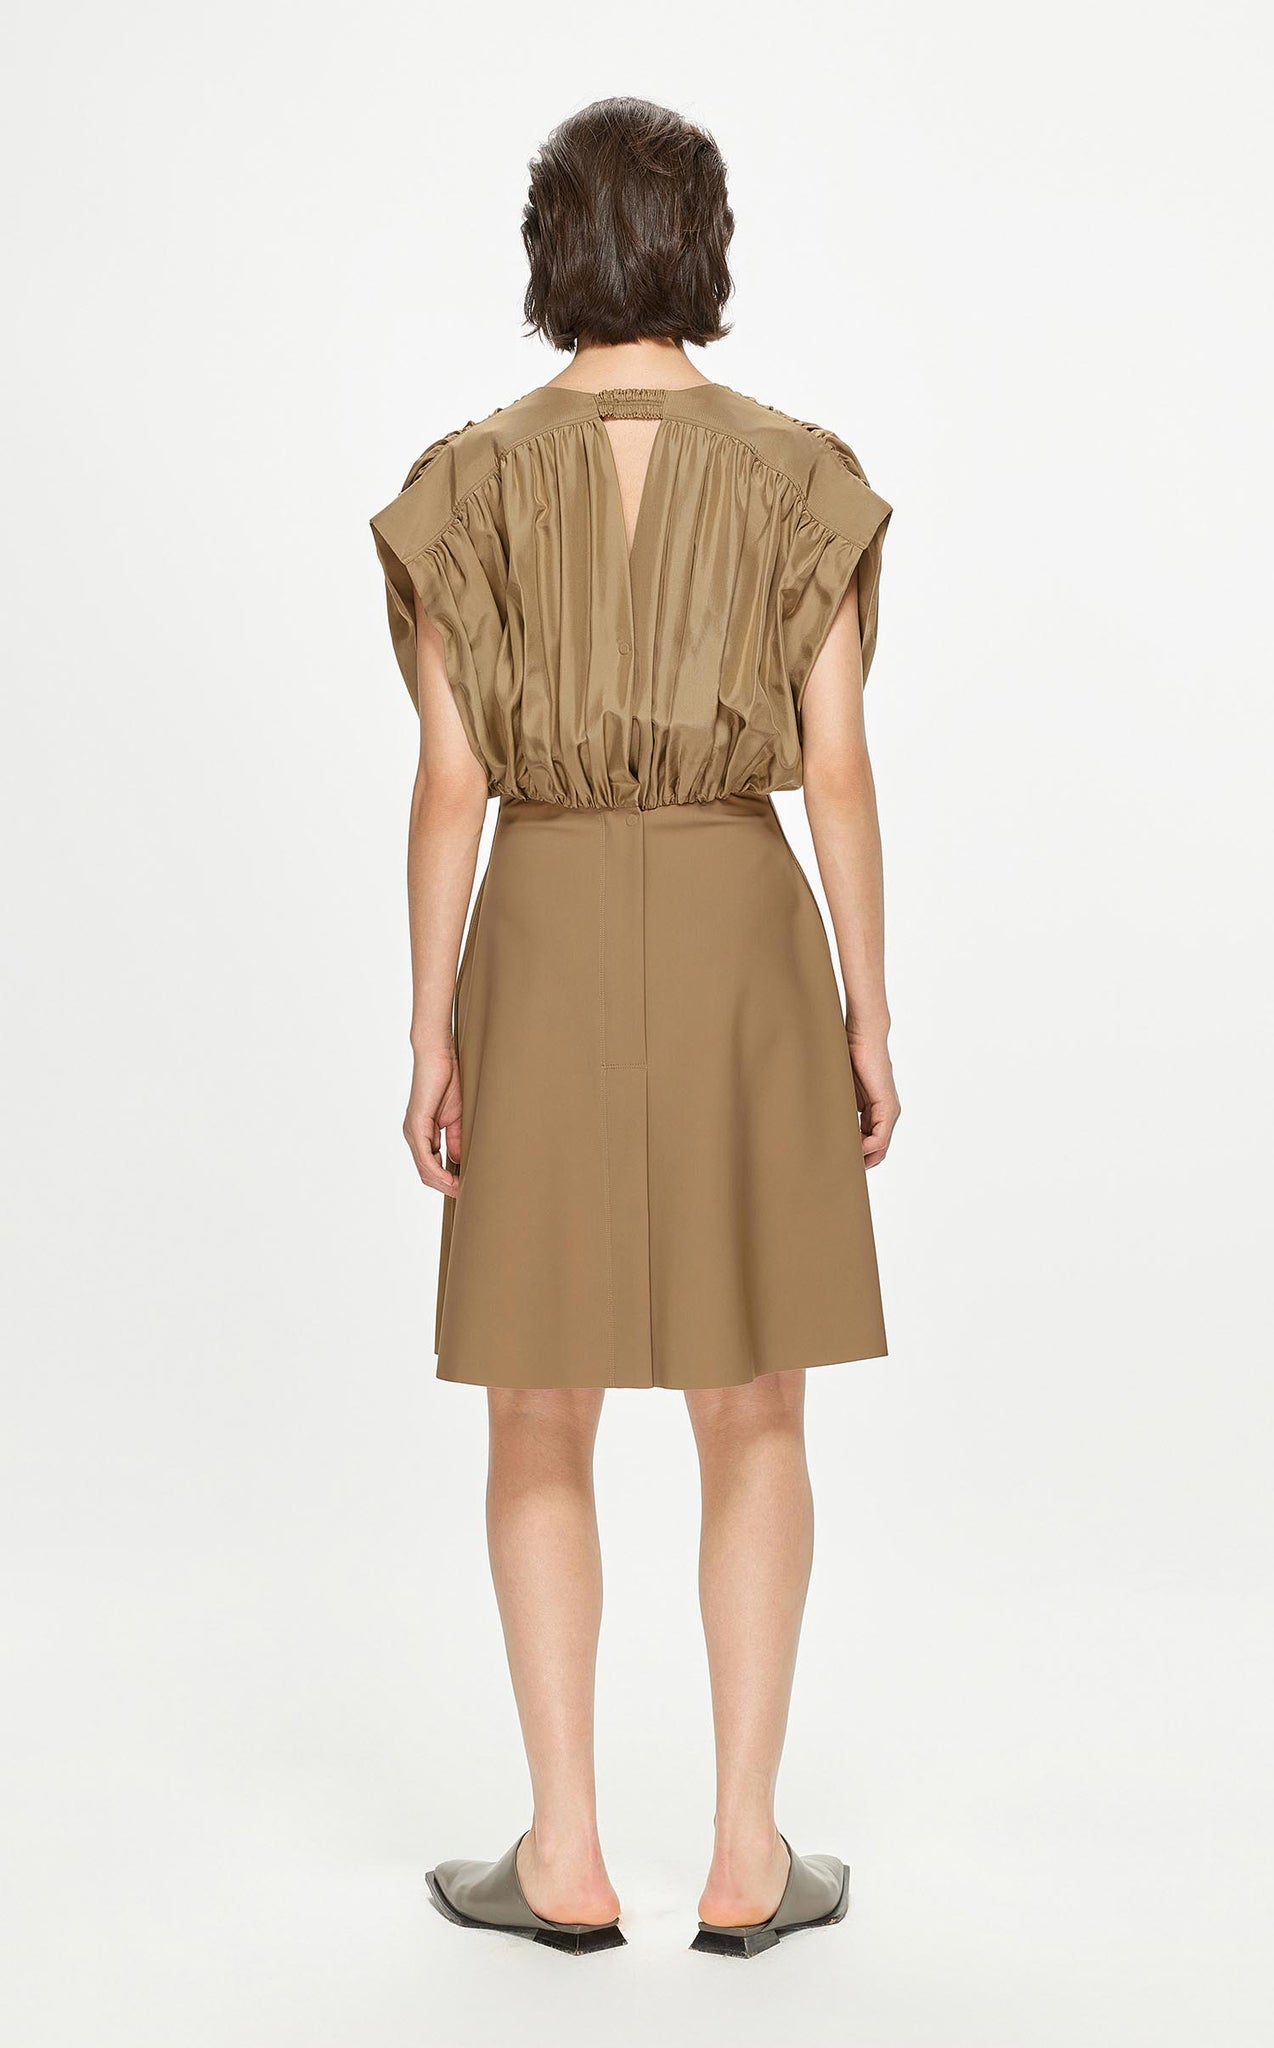 Dresses / JNBY Solid A-Line Sleeveless Dress